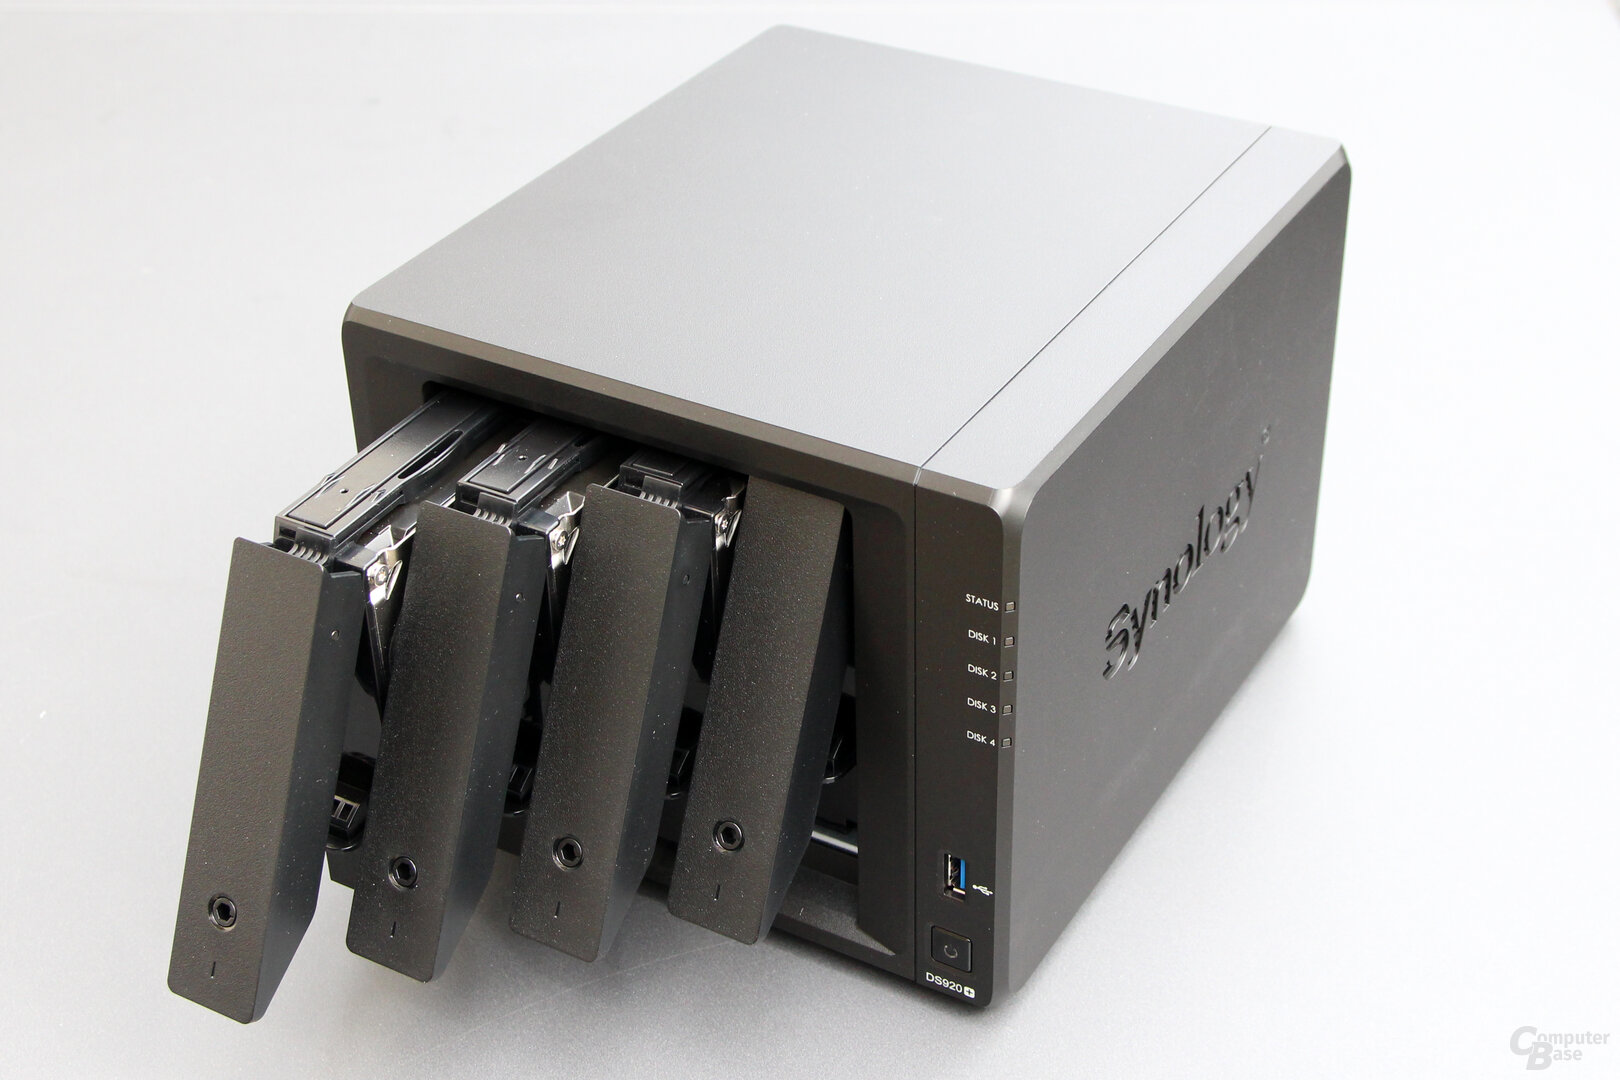 Synology DS920+